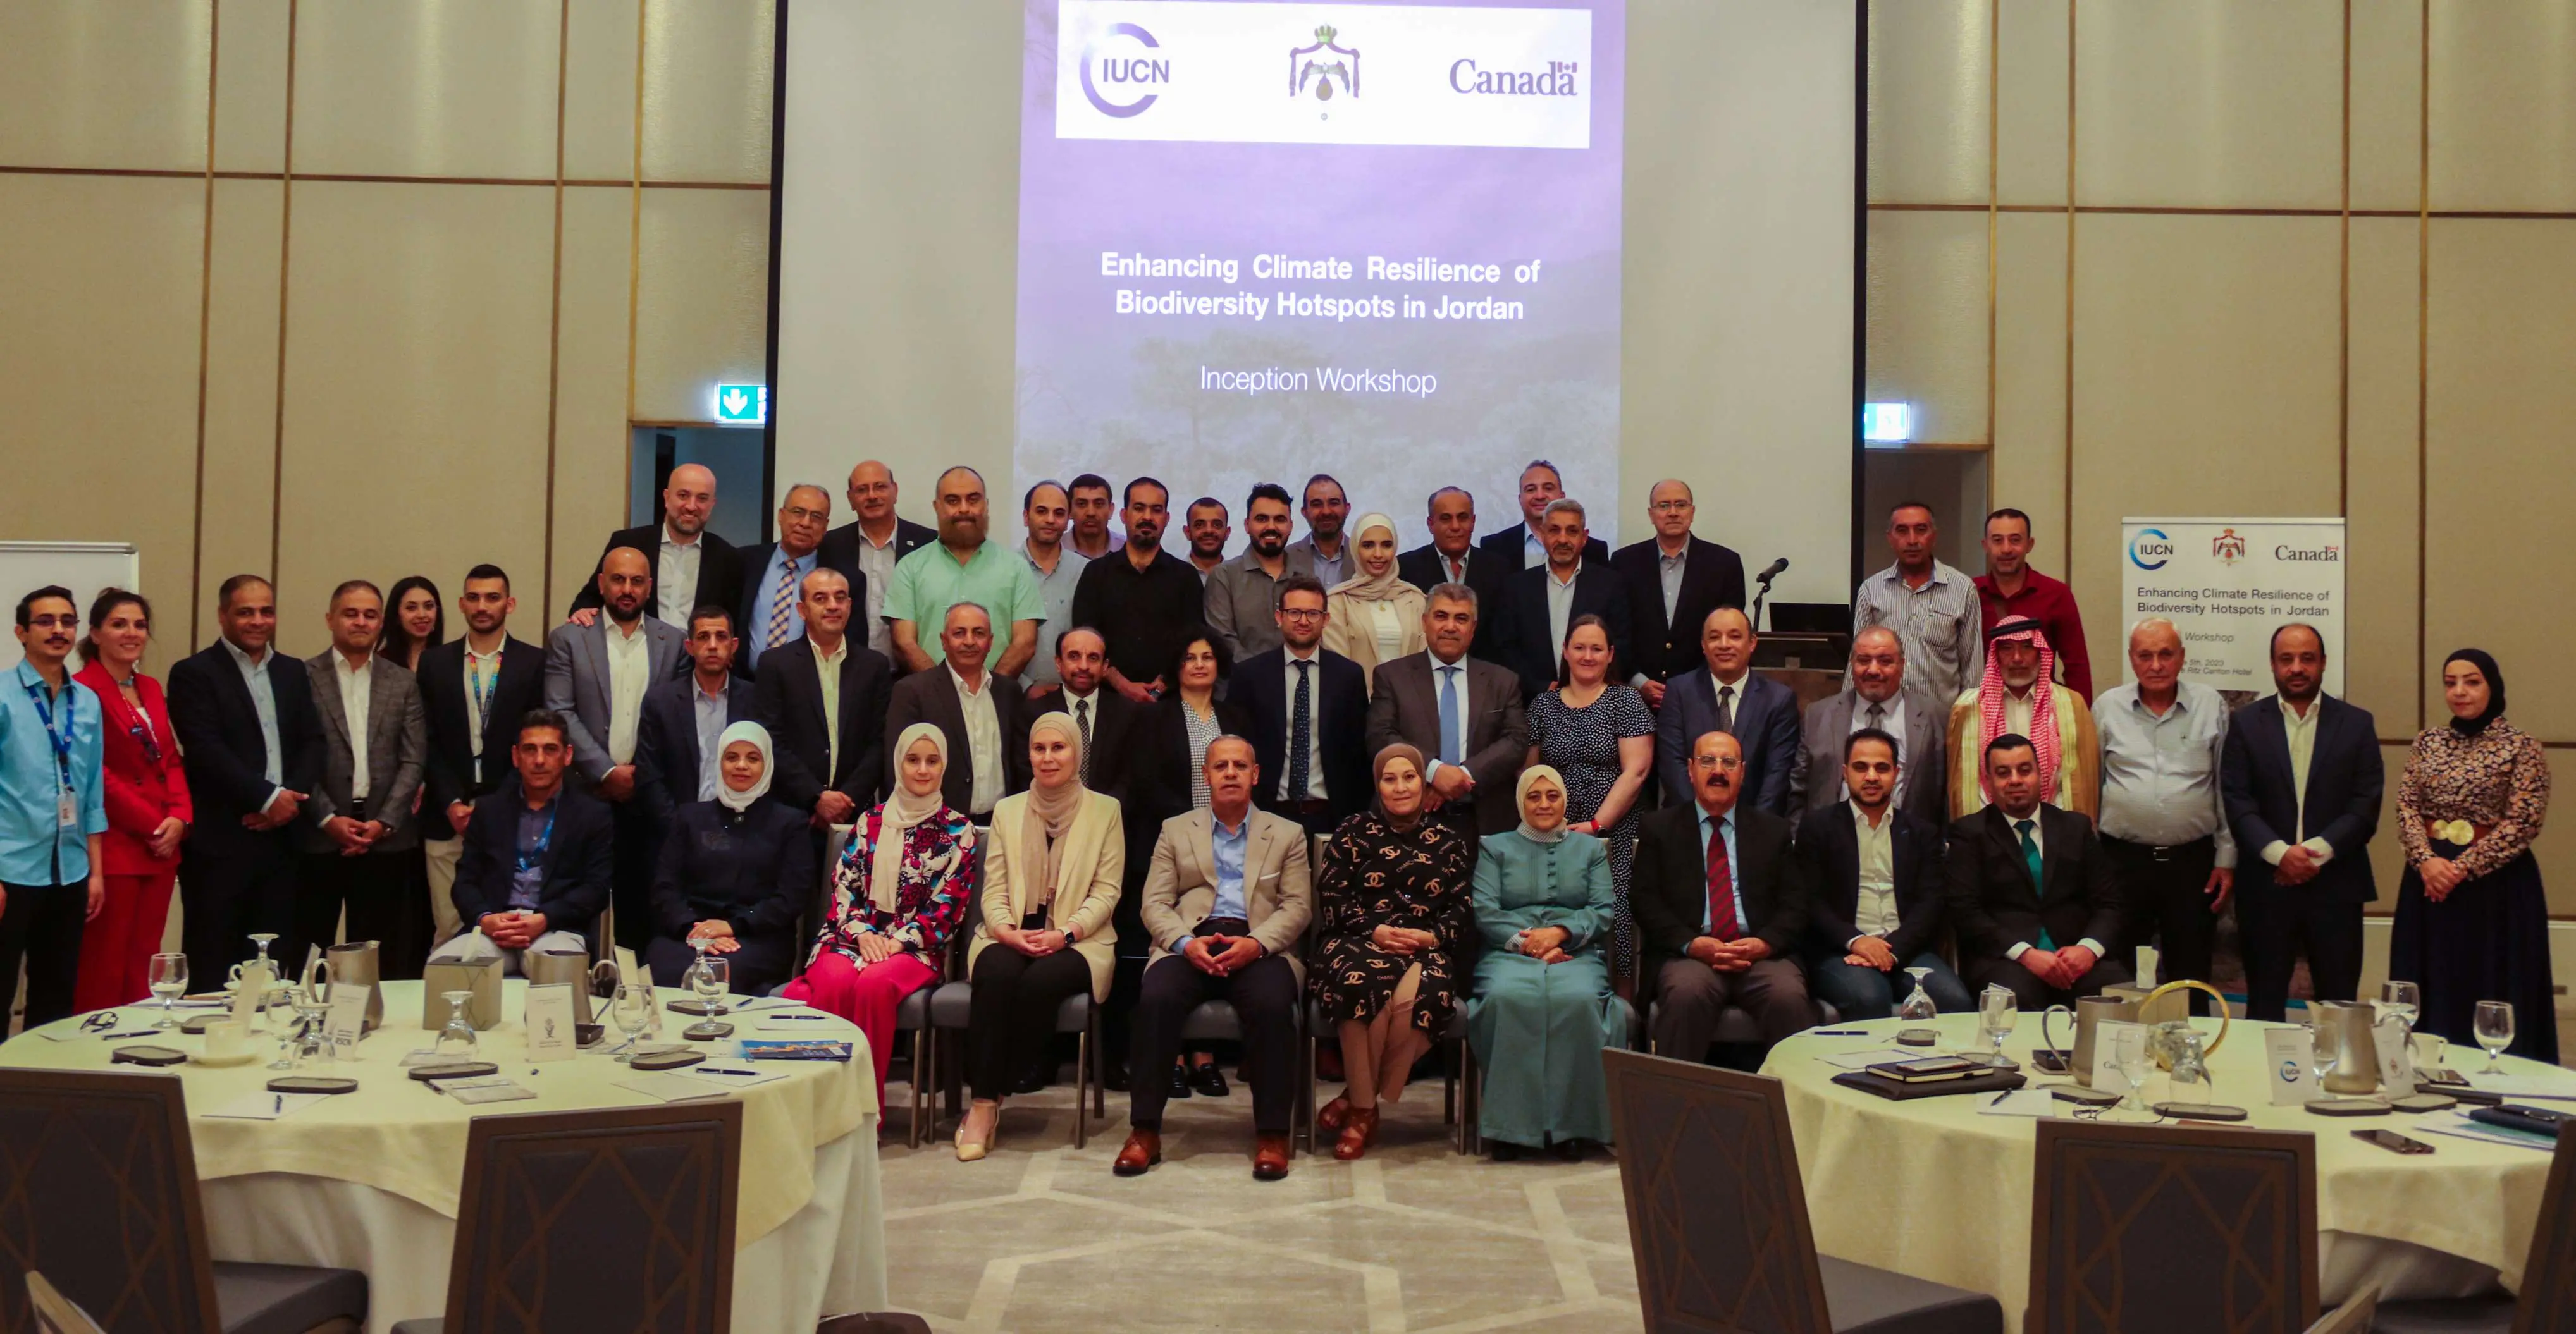 IUCN Lunches the Project “Enhancing climate resilience of Biodiversity Hotspots in Jordan"